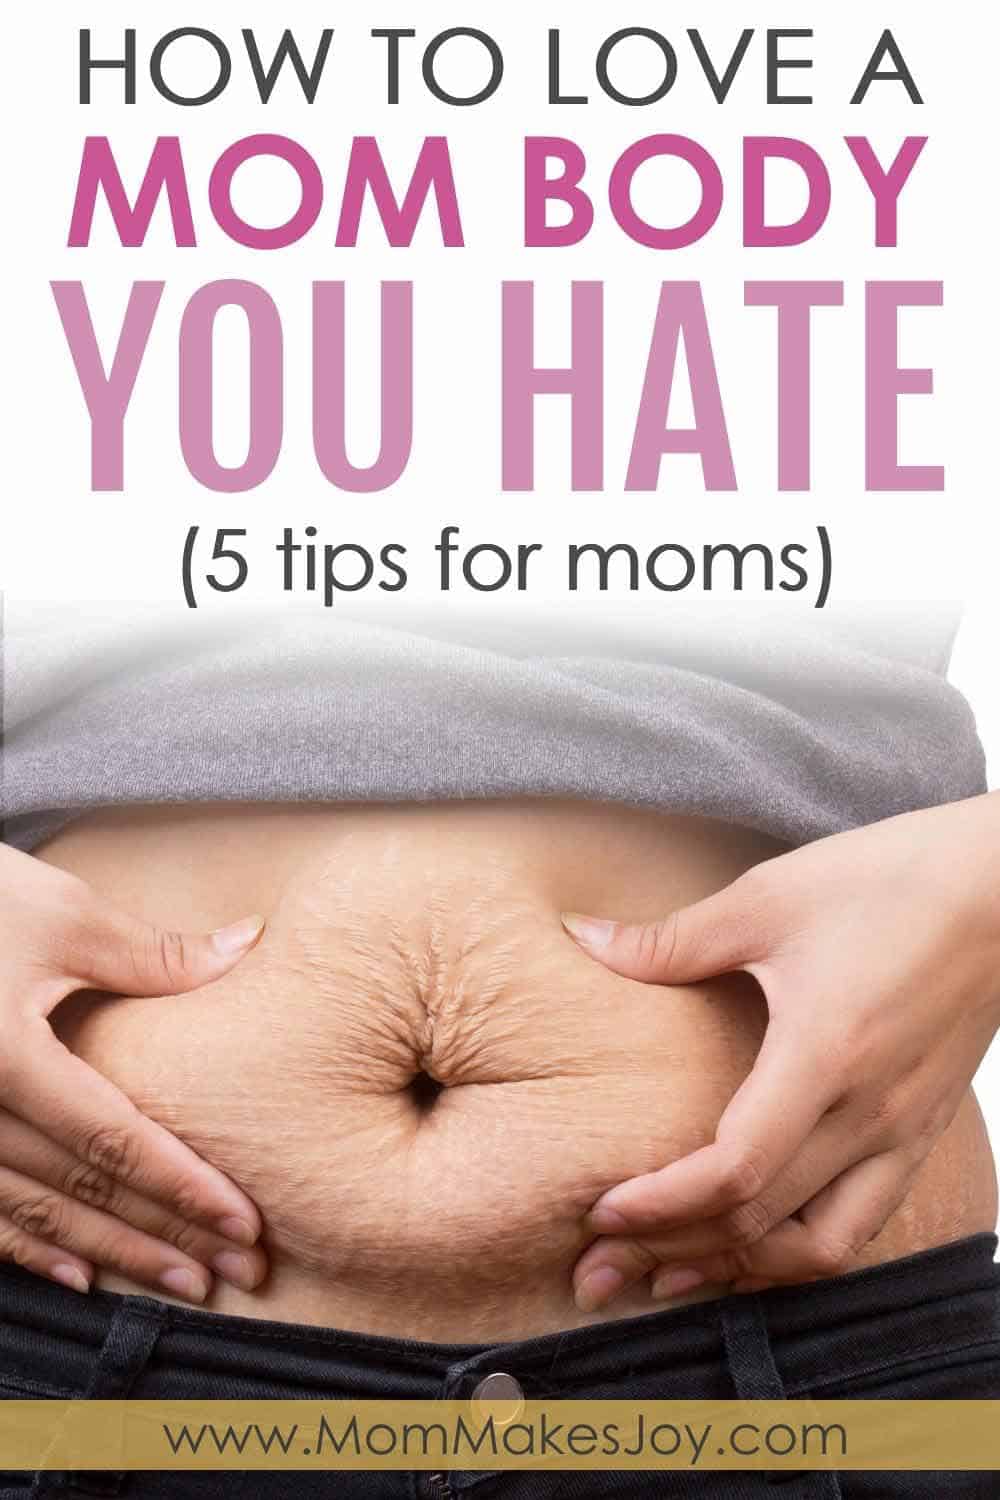 How to love a mom body you hate